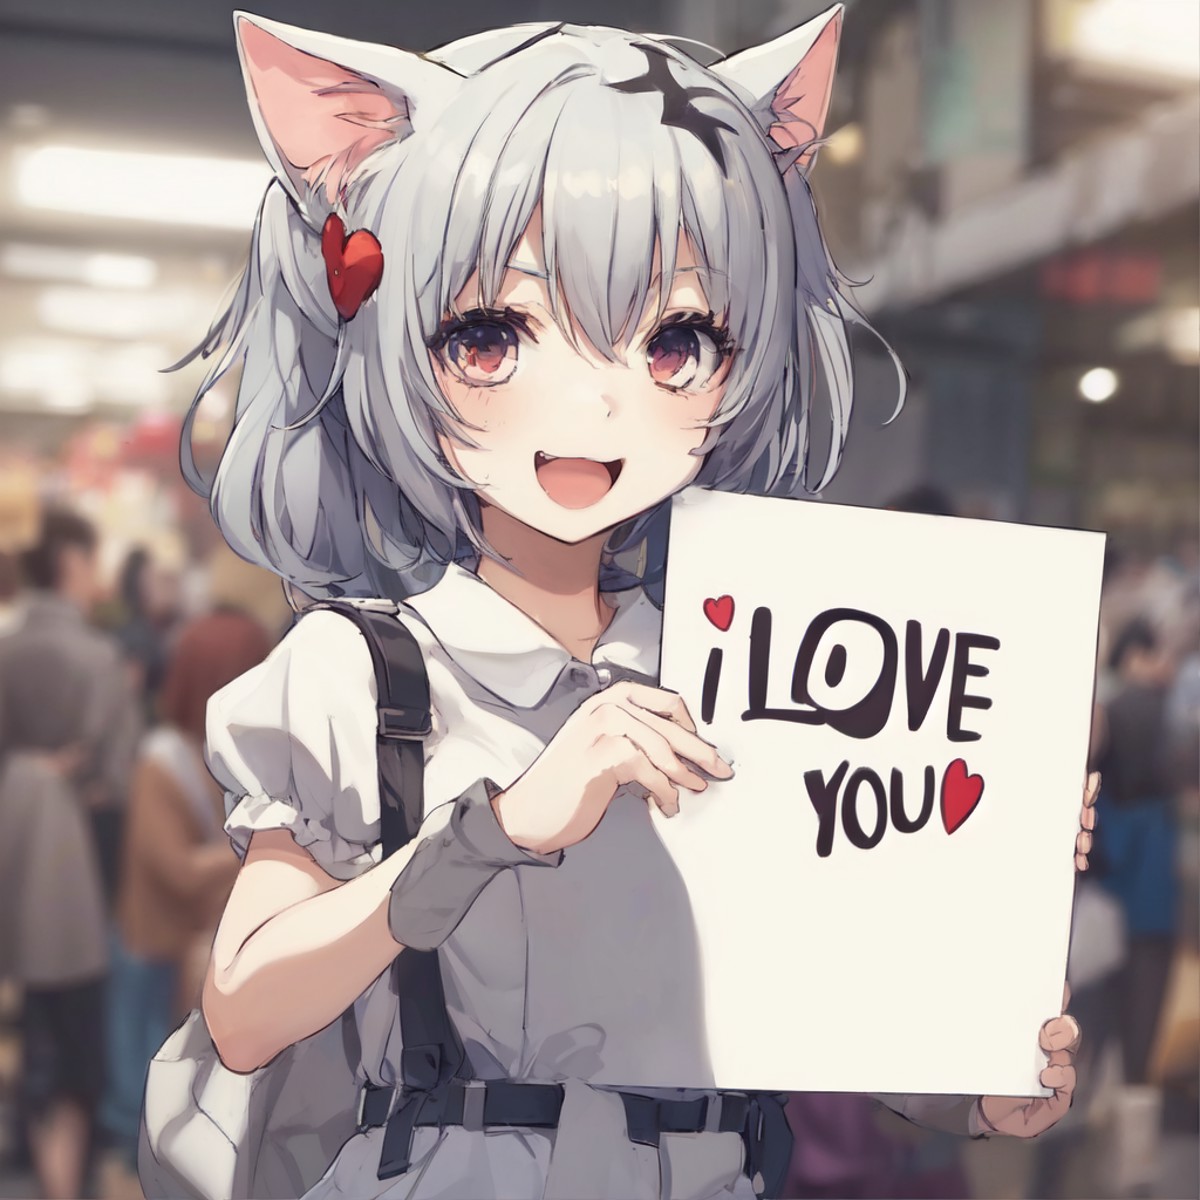 anime, photo of a cute catgirl holding a sign that says "I love you"